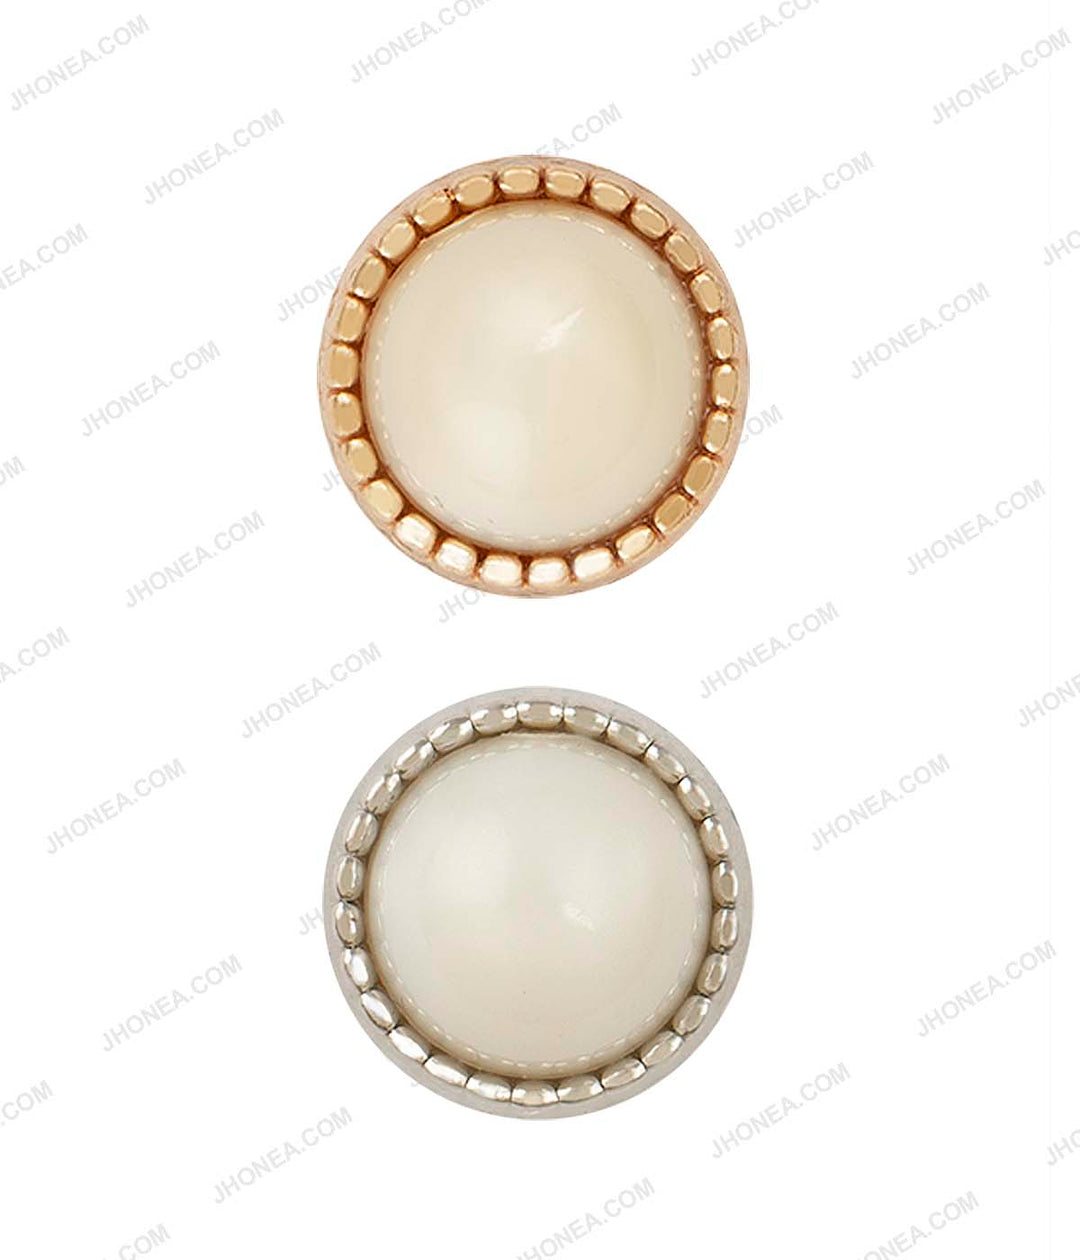 Shiny Gold & Shiny Silver Glossy Dome Pearl Buttons for Ladies